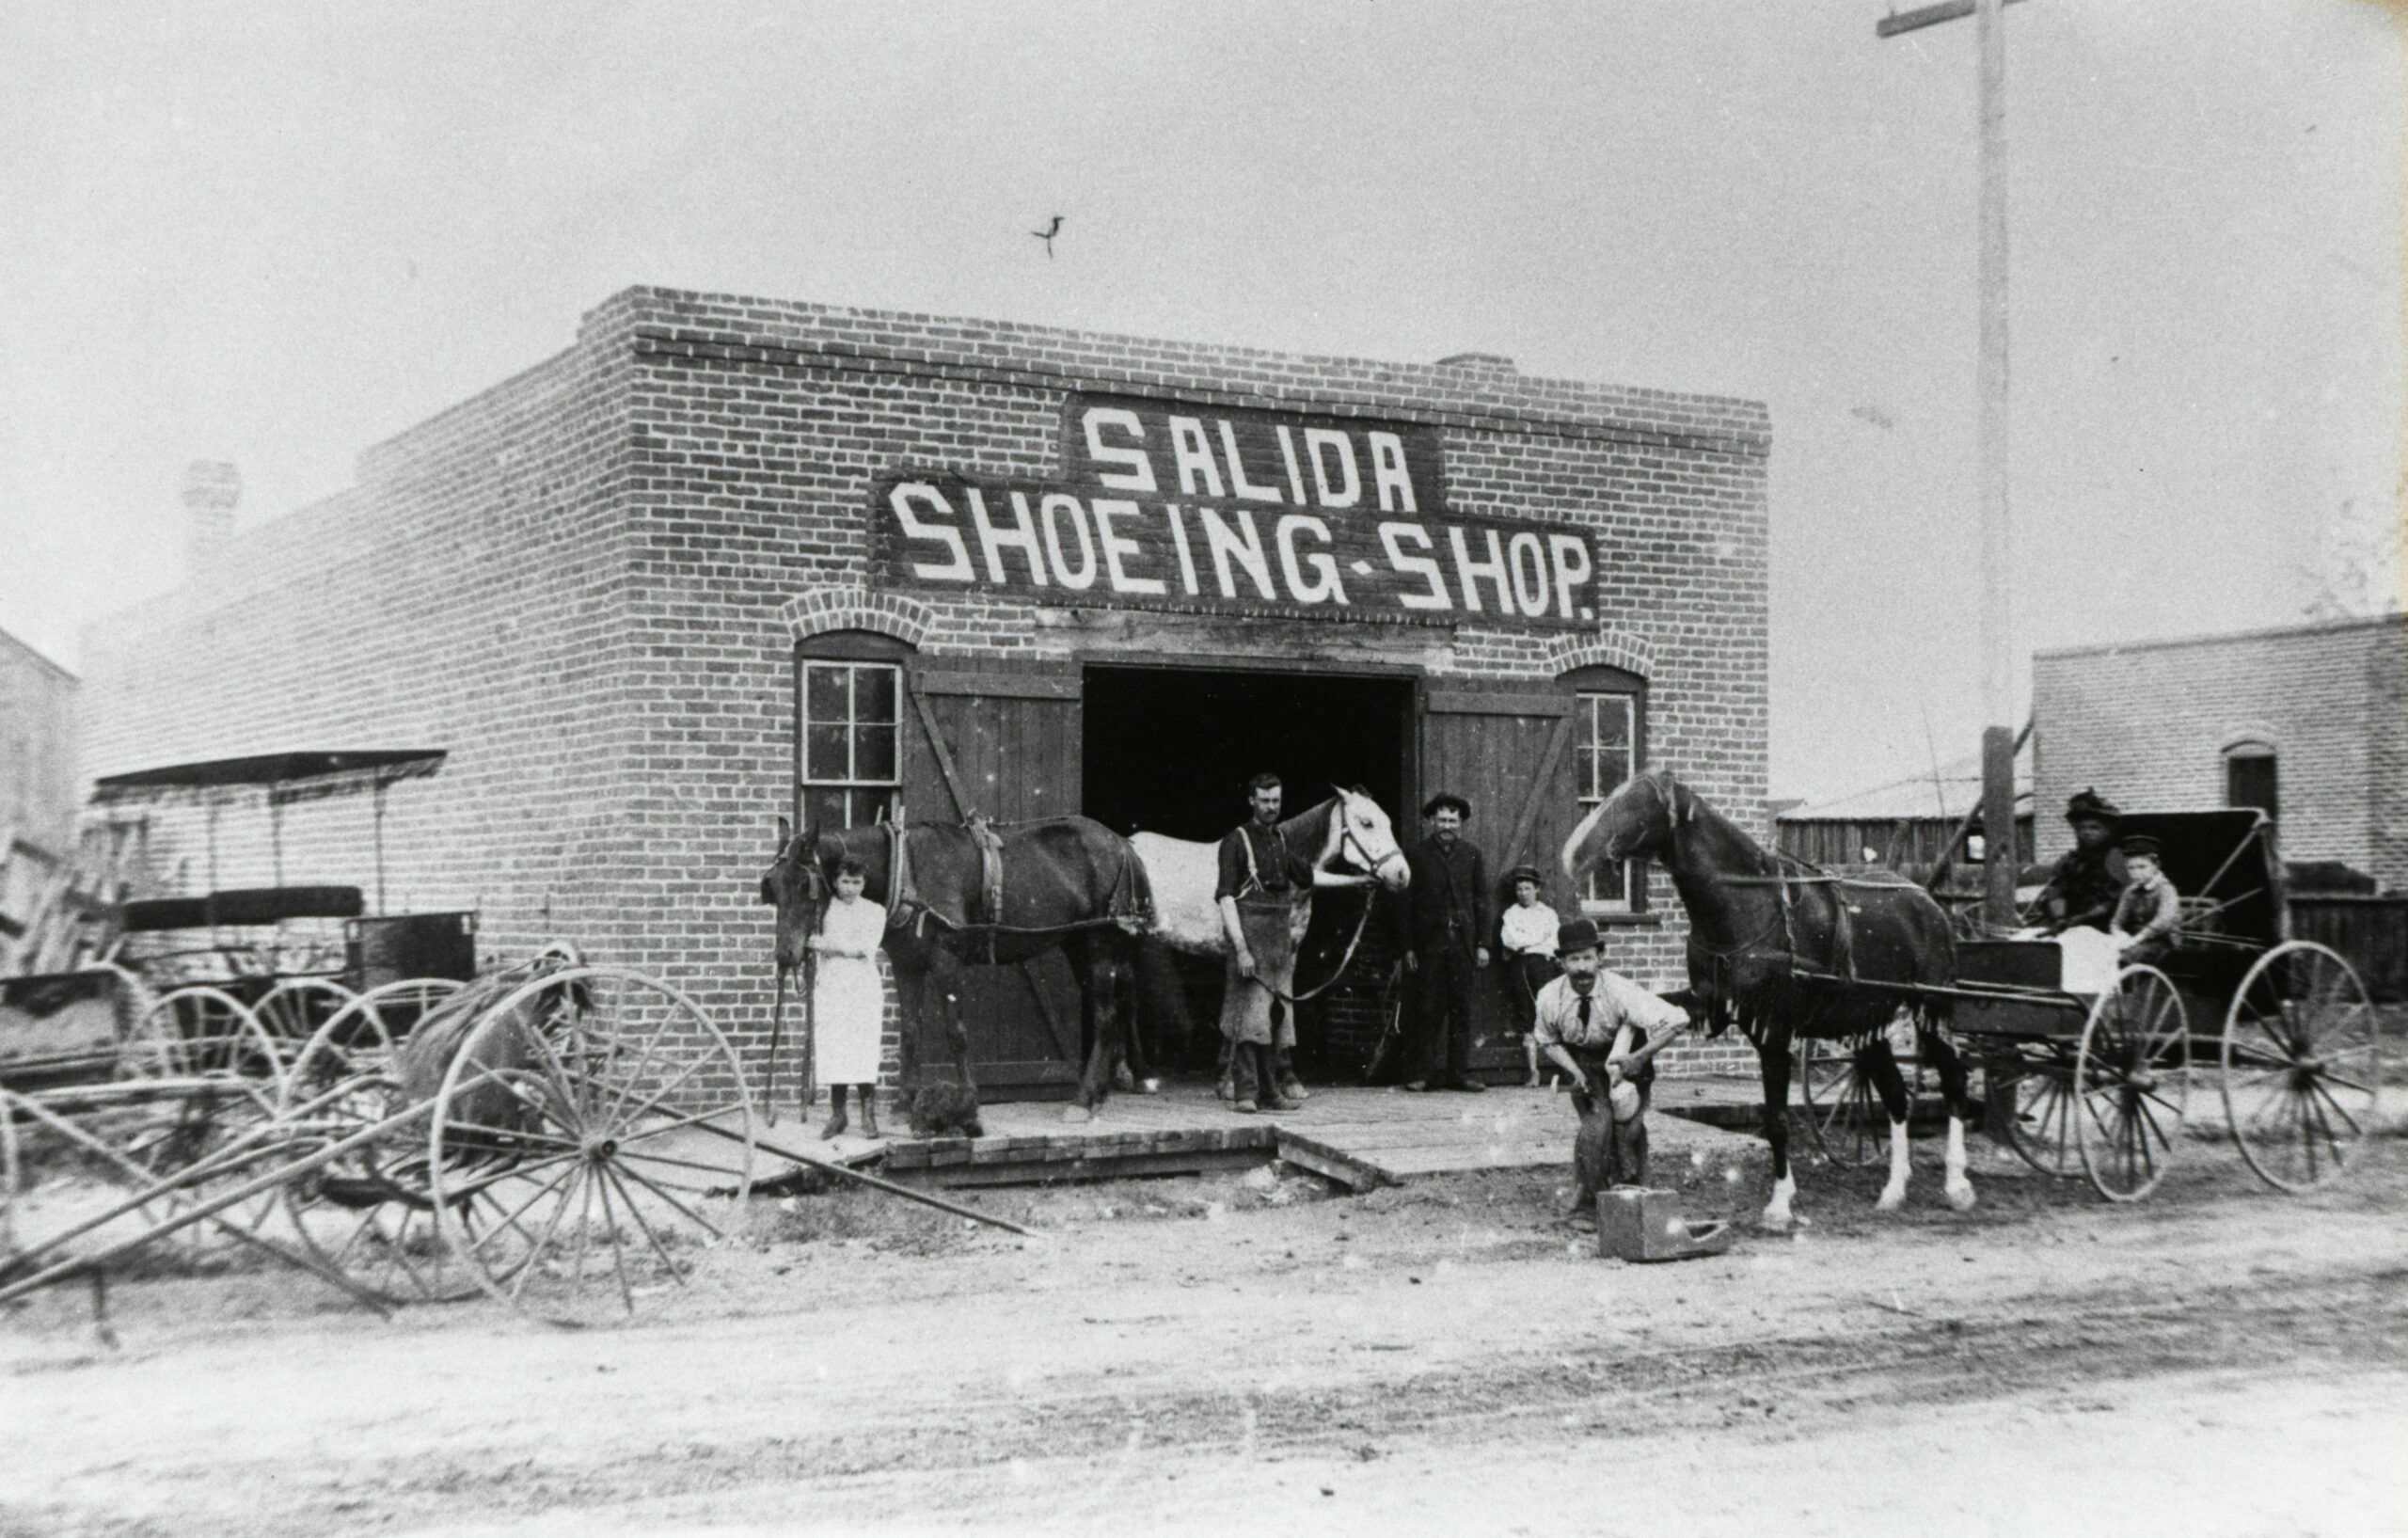 This horseshoeing business had the financial backing to locate in a brick building – much preferred after the 1888 fire – which is said to have been located between First and Second streets on G Street (at the corner of the alley). Netting was draped over the body of a horse to ward off flies and mosquitoes, terrible pests for both horses and people in the days before sanitation and mosquito-control districts. Used buggies were in the lot beside the shop.  (2)